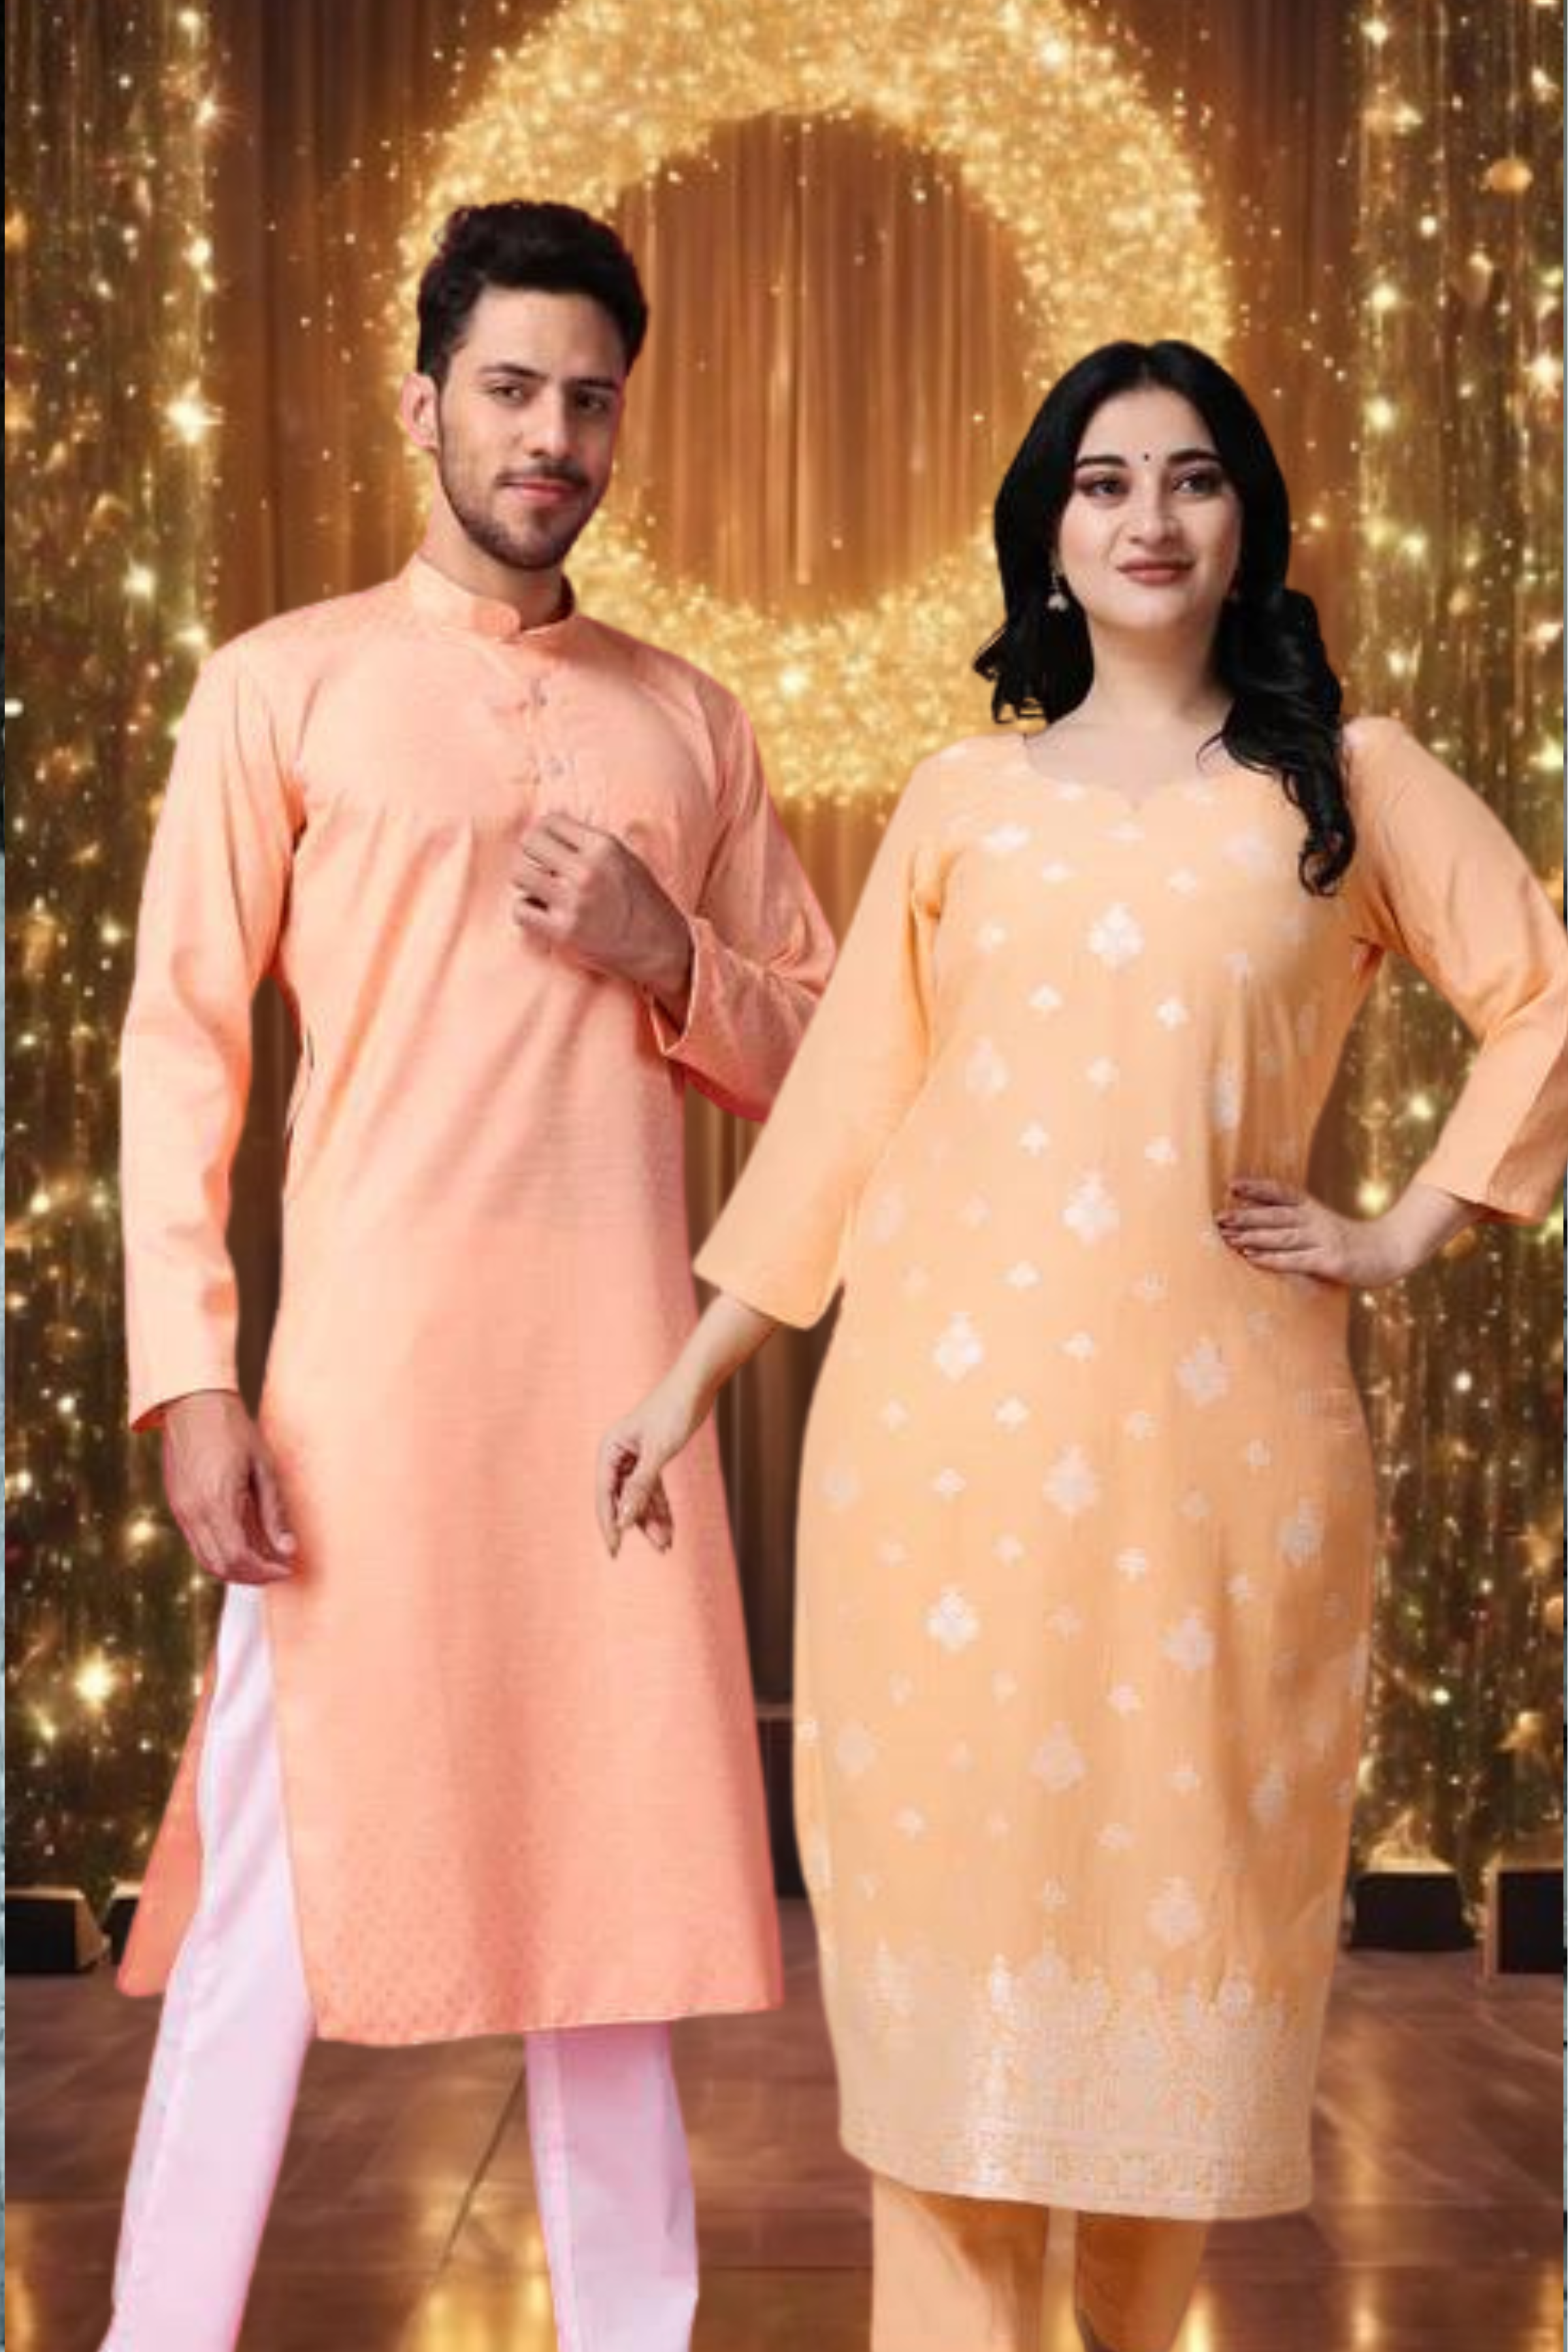 Wedding Hut Designer Boutique - Mr&mrs 🌹🌹 Couple dress 👫 We Are Taking  Order Worldwide For Your Dream Bridal Dress & causal dress & partywear dress  👗 & Designs. Please Feel Free